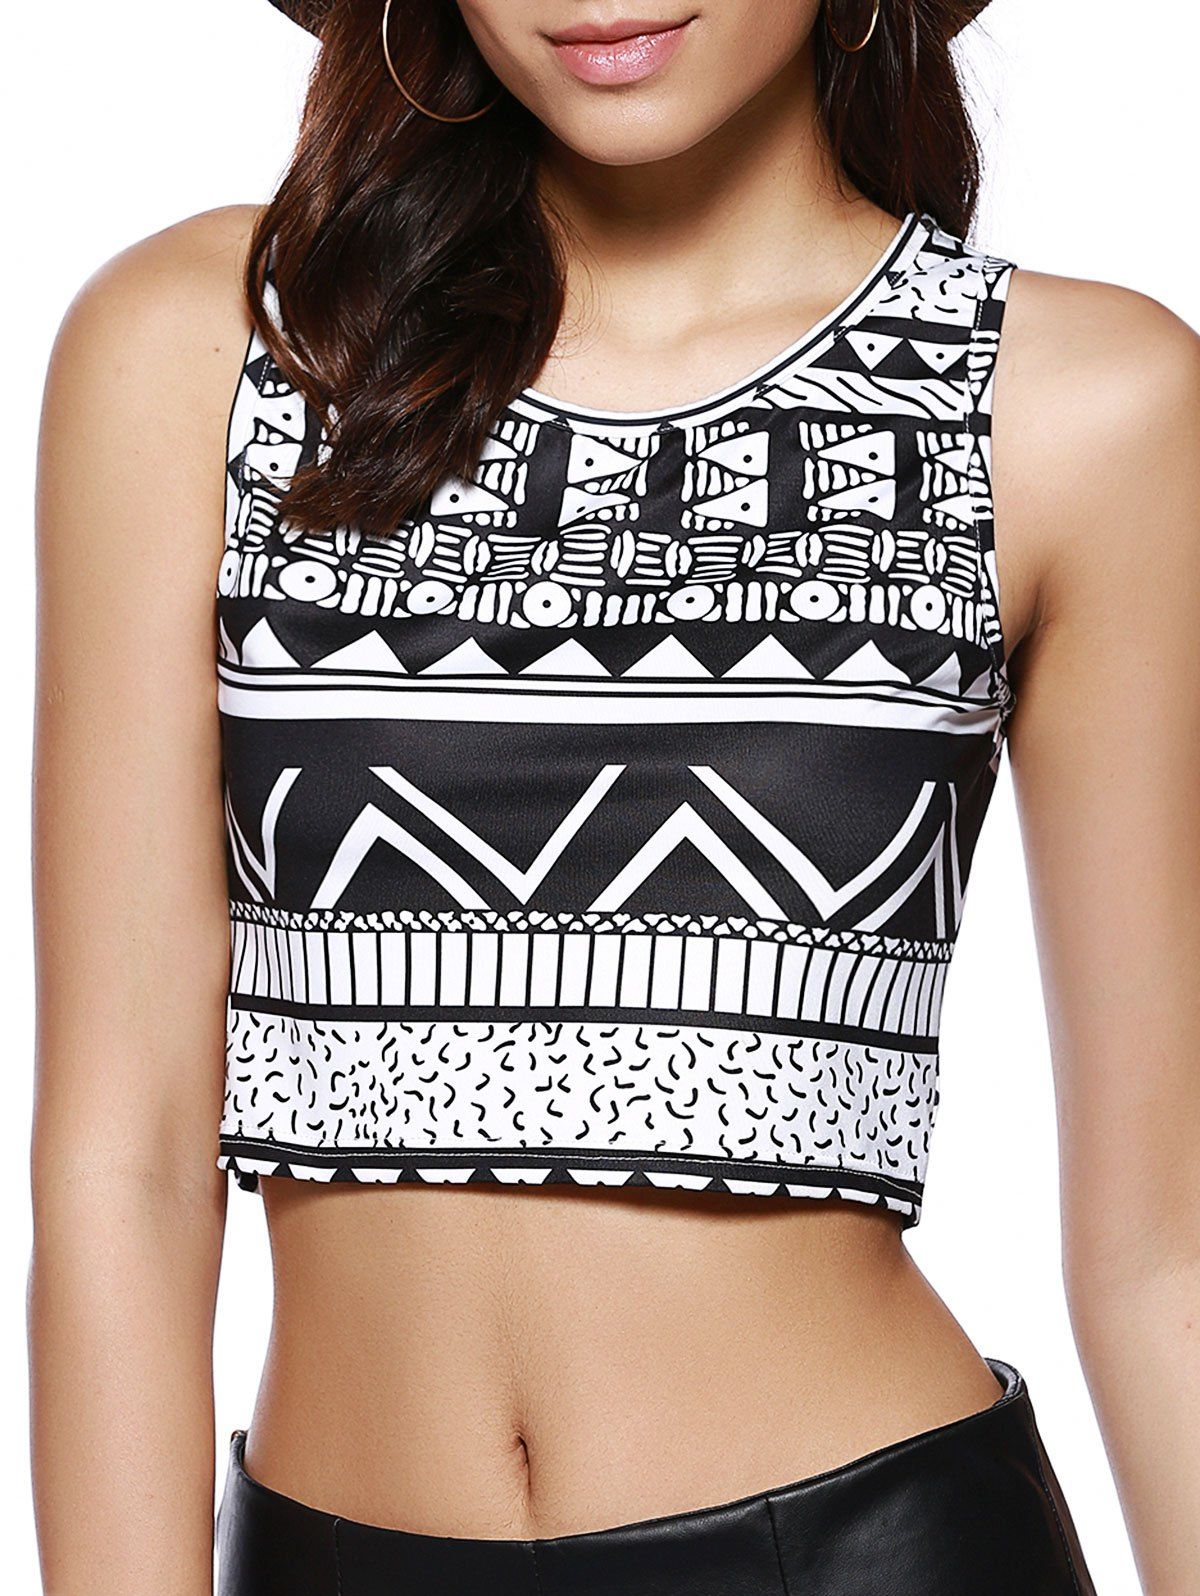 Trendy Tribal Print Tank Top For Women - COLORMIX M